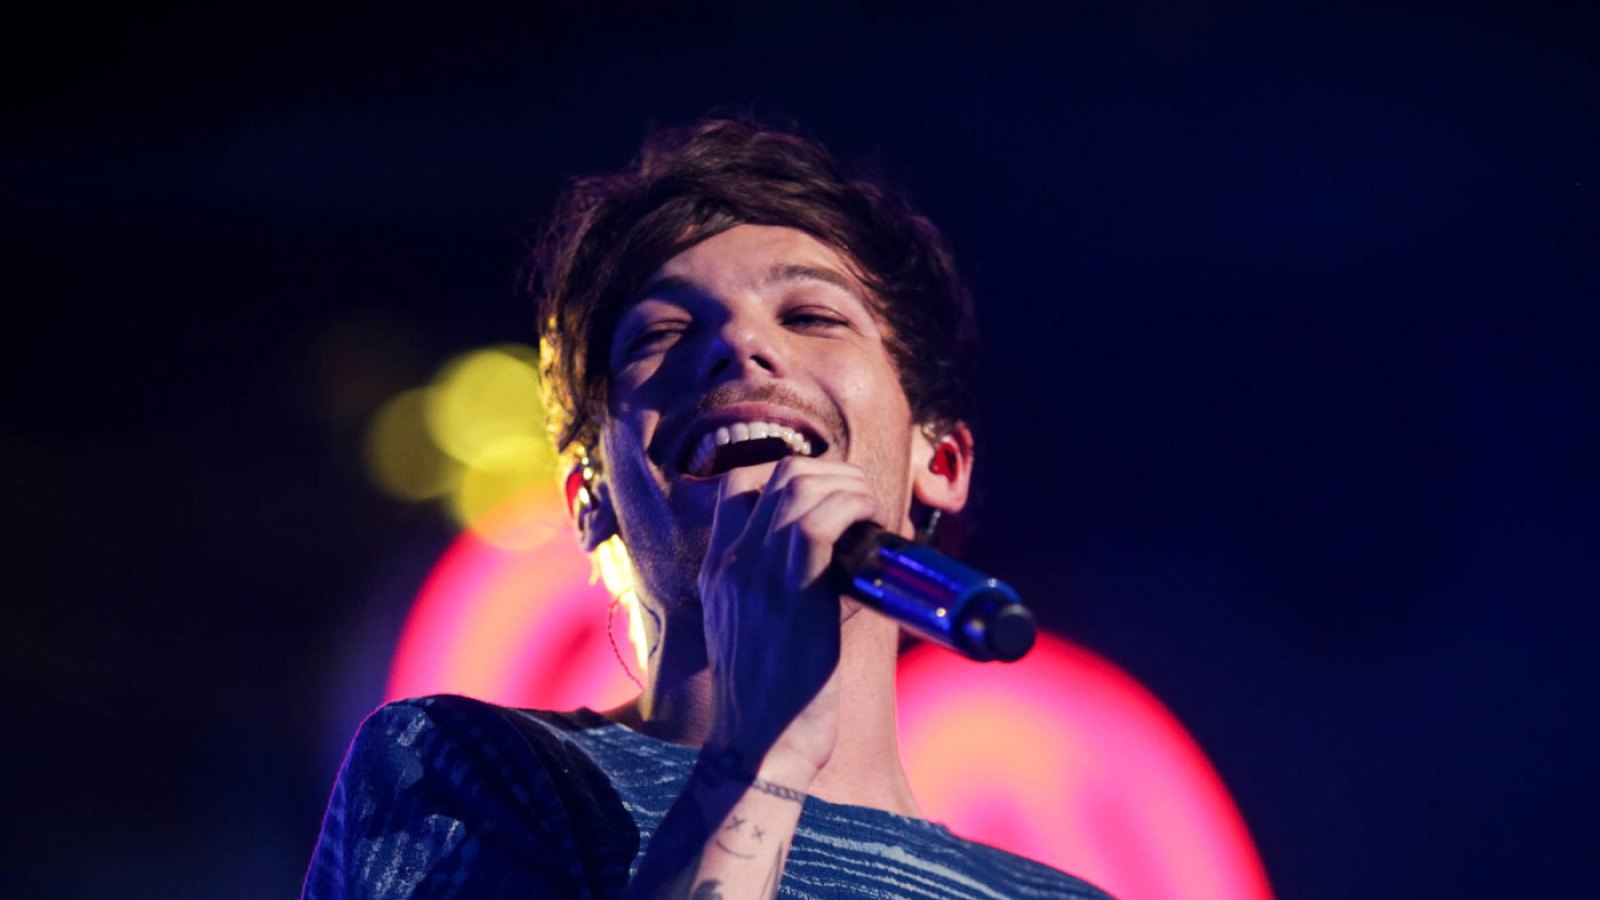 Louis Tomlinson performs onstage during 102.7 KIIS FM’s Jingle Ball 2015